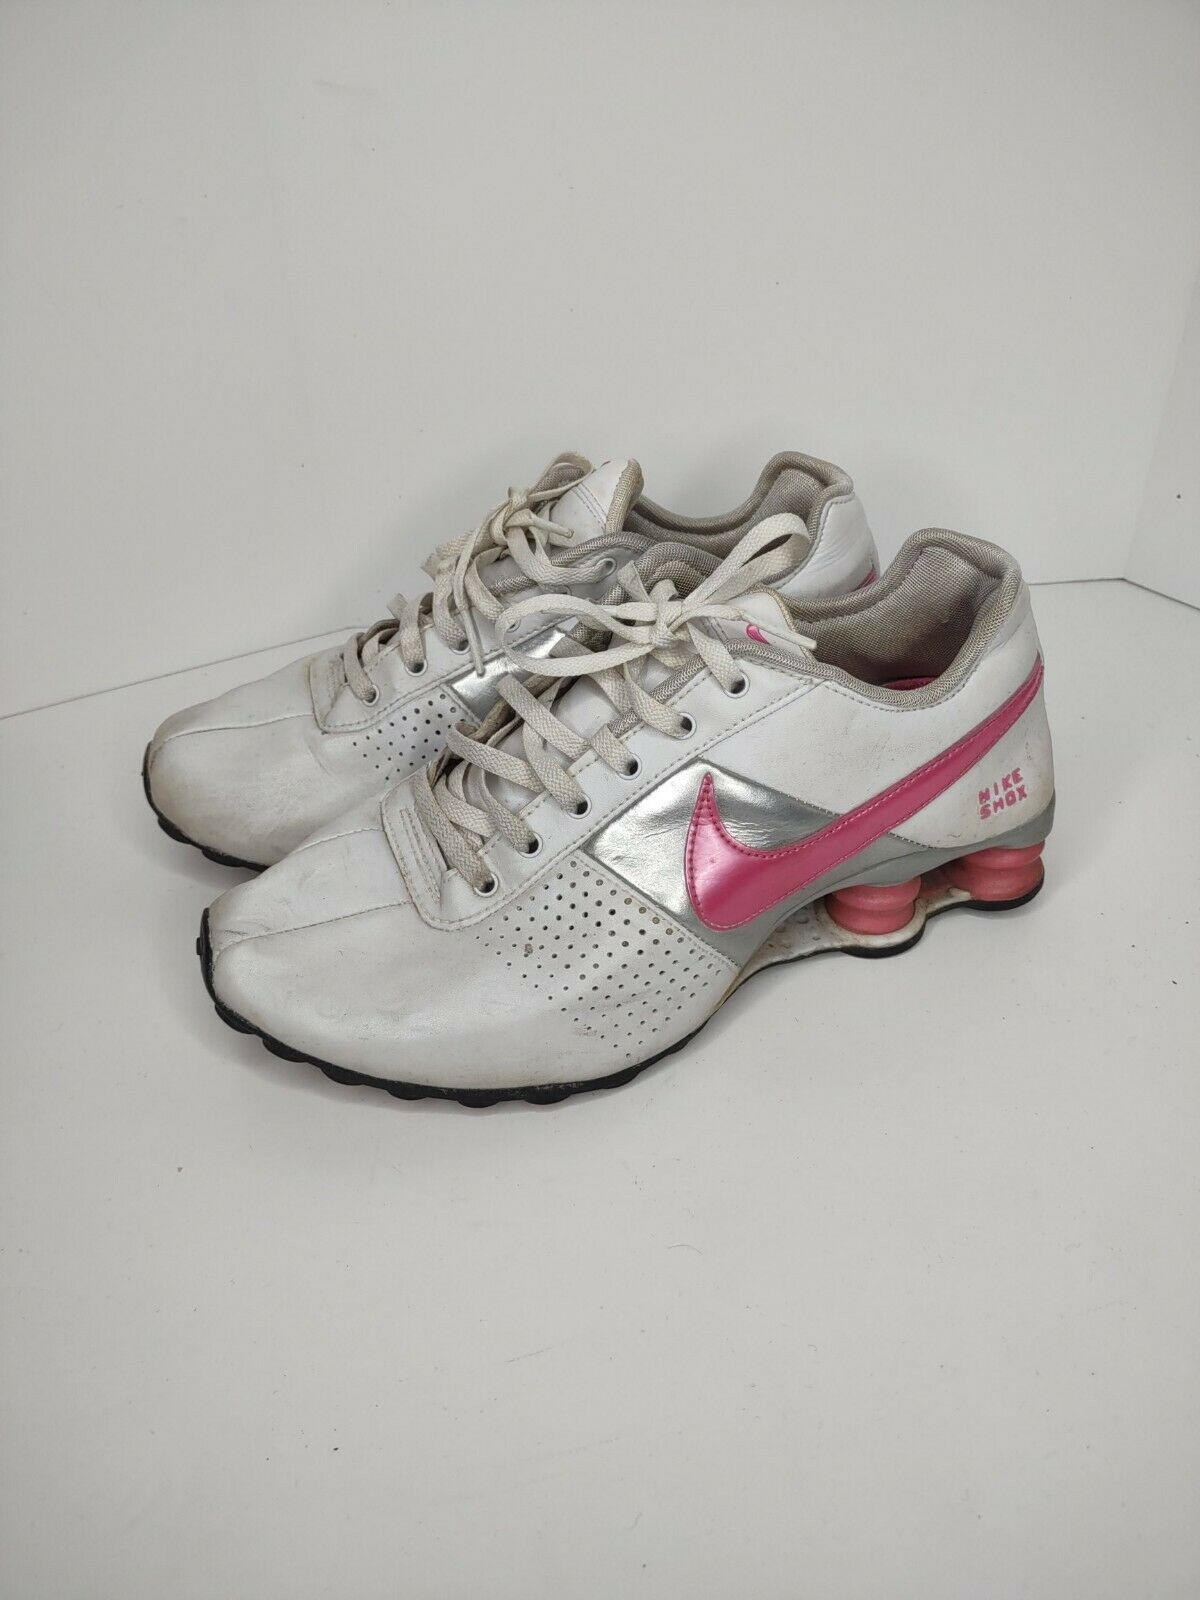 Nike Women's Shox 317549-160 White Pink Silver Running Athletic Shoes Size 6.5